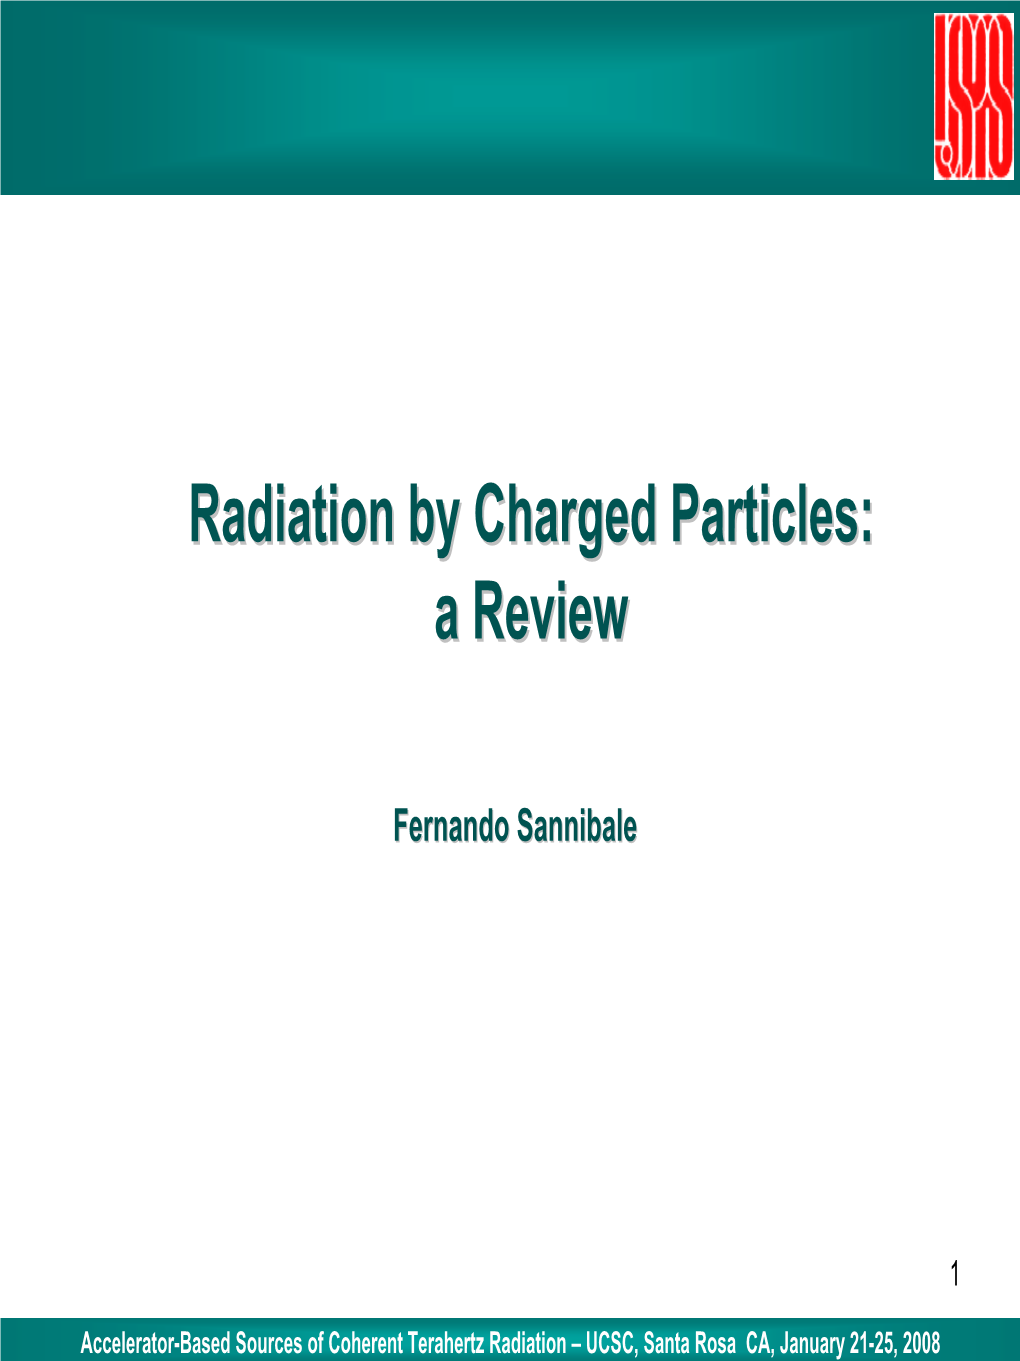 Radiation by Charged Particles: a Review Contents F.Sannibale Contents